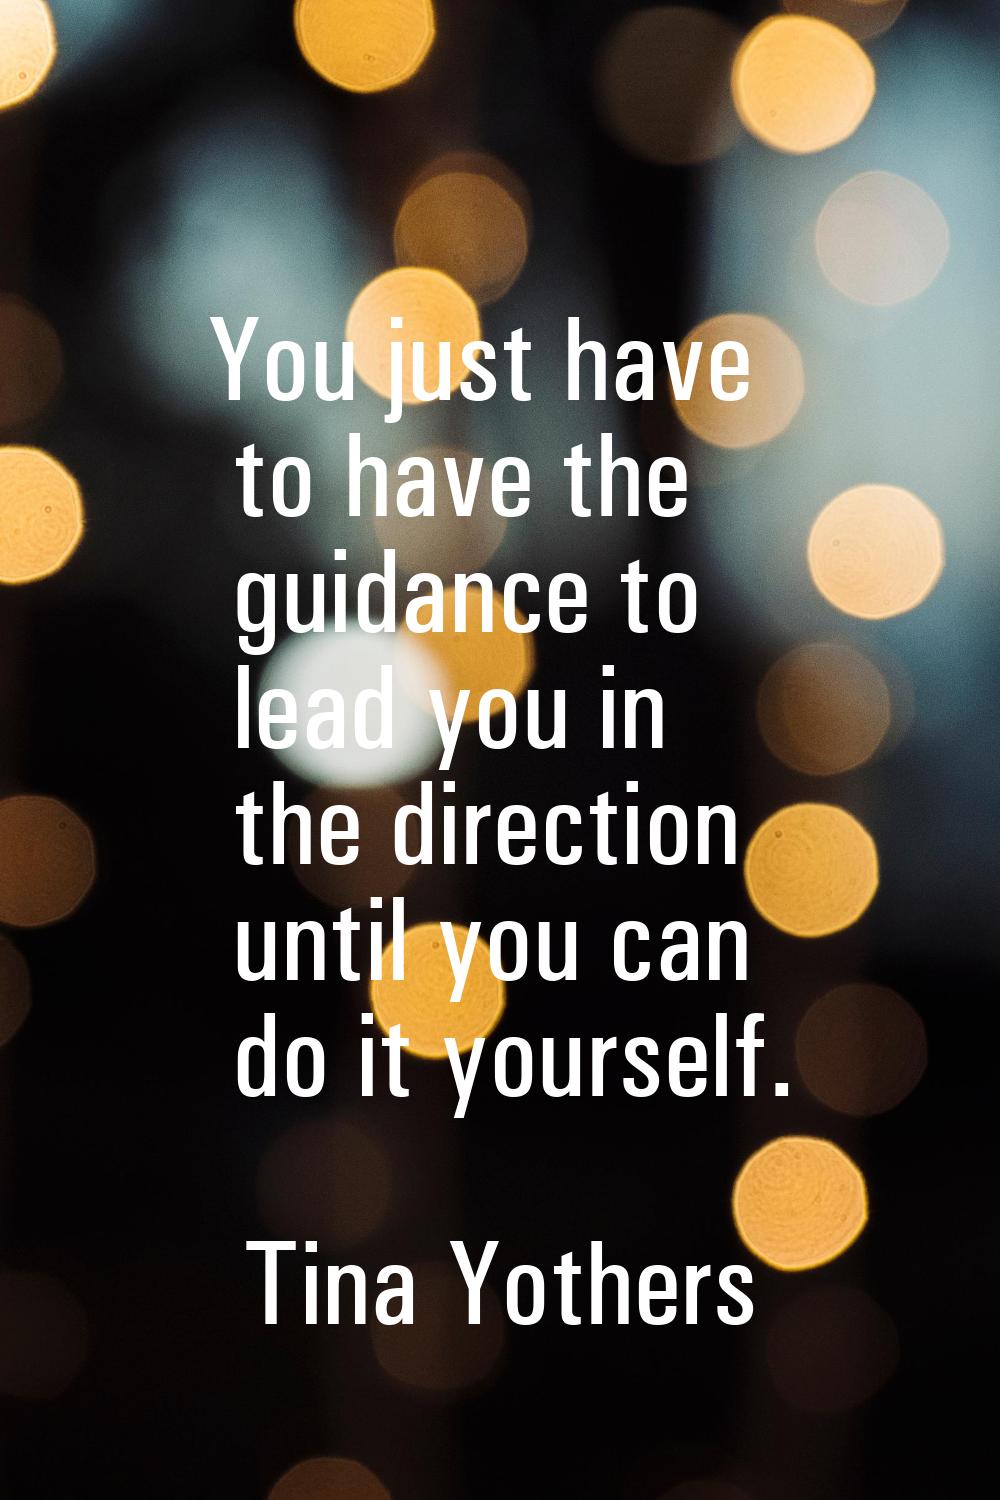 You just have to have the guidance to lead you in the direction until you can do it yourself.